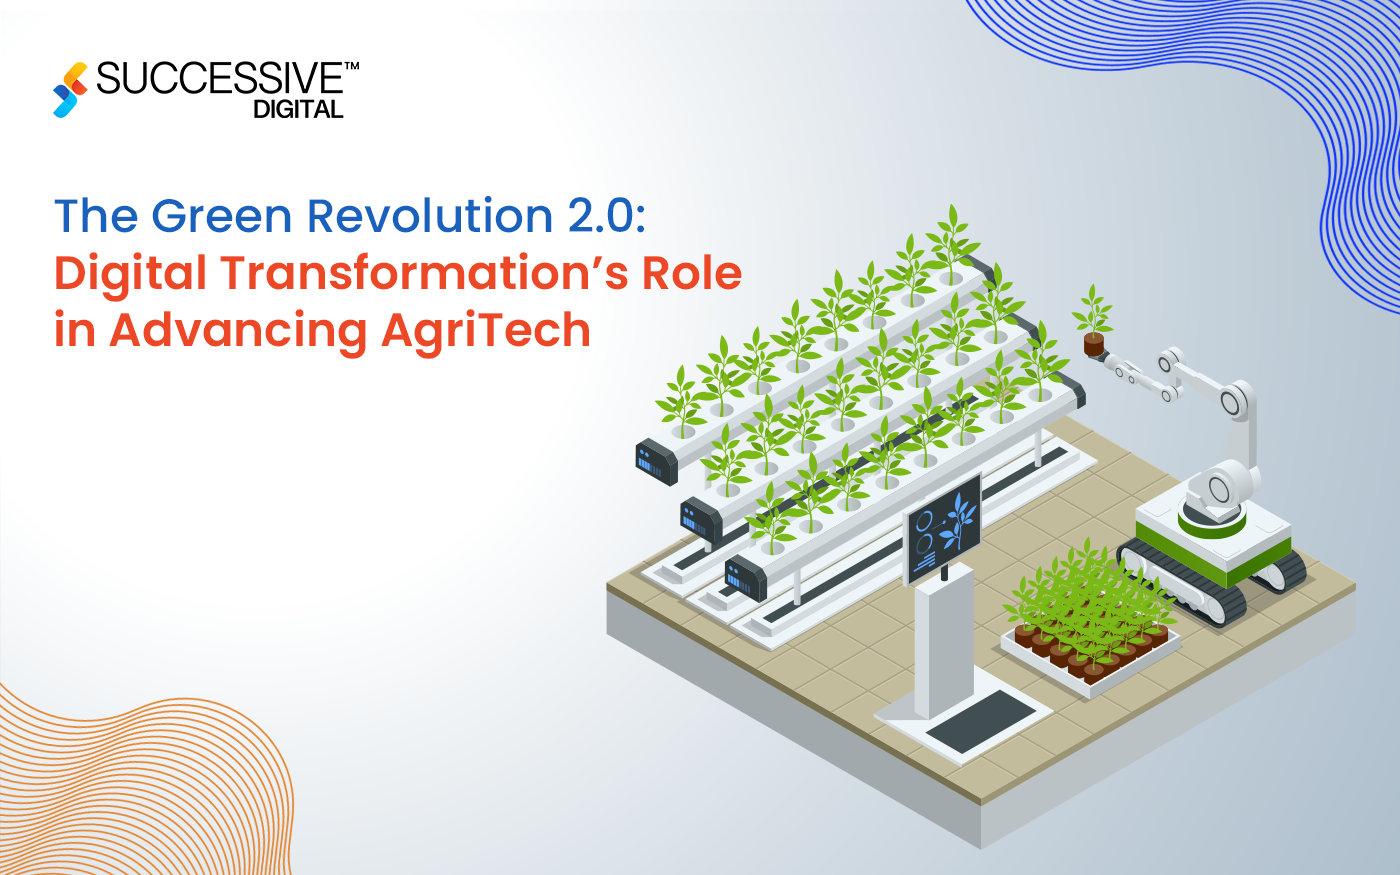 The Green Revolution 2.0: Digital Transformation’s Role in Advancing AgriTech